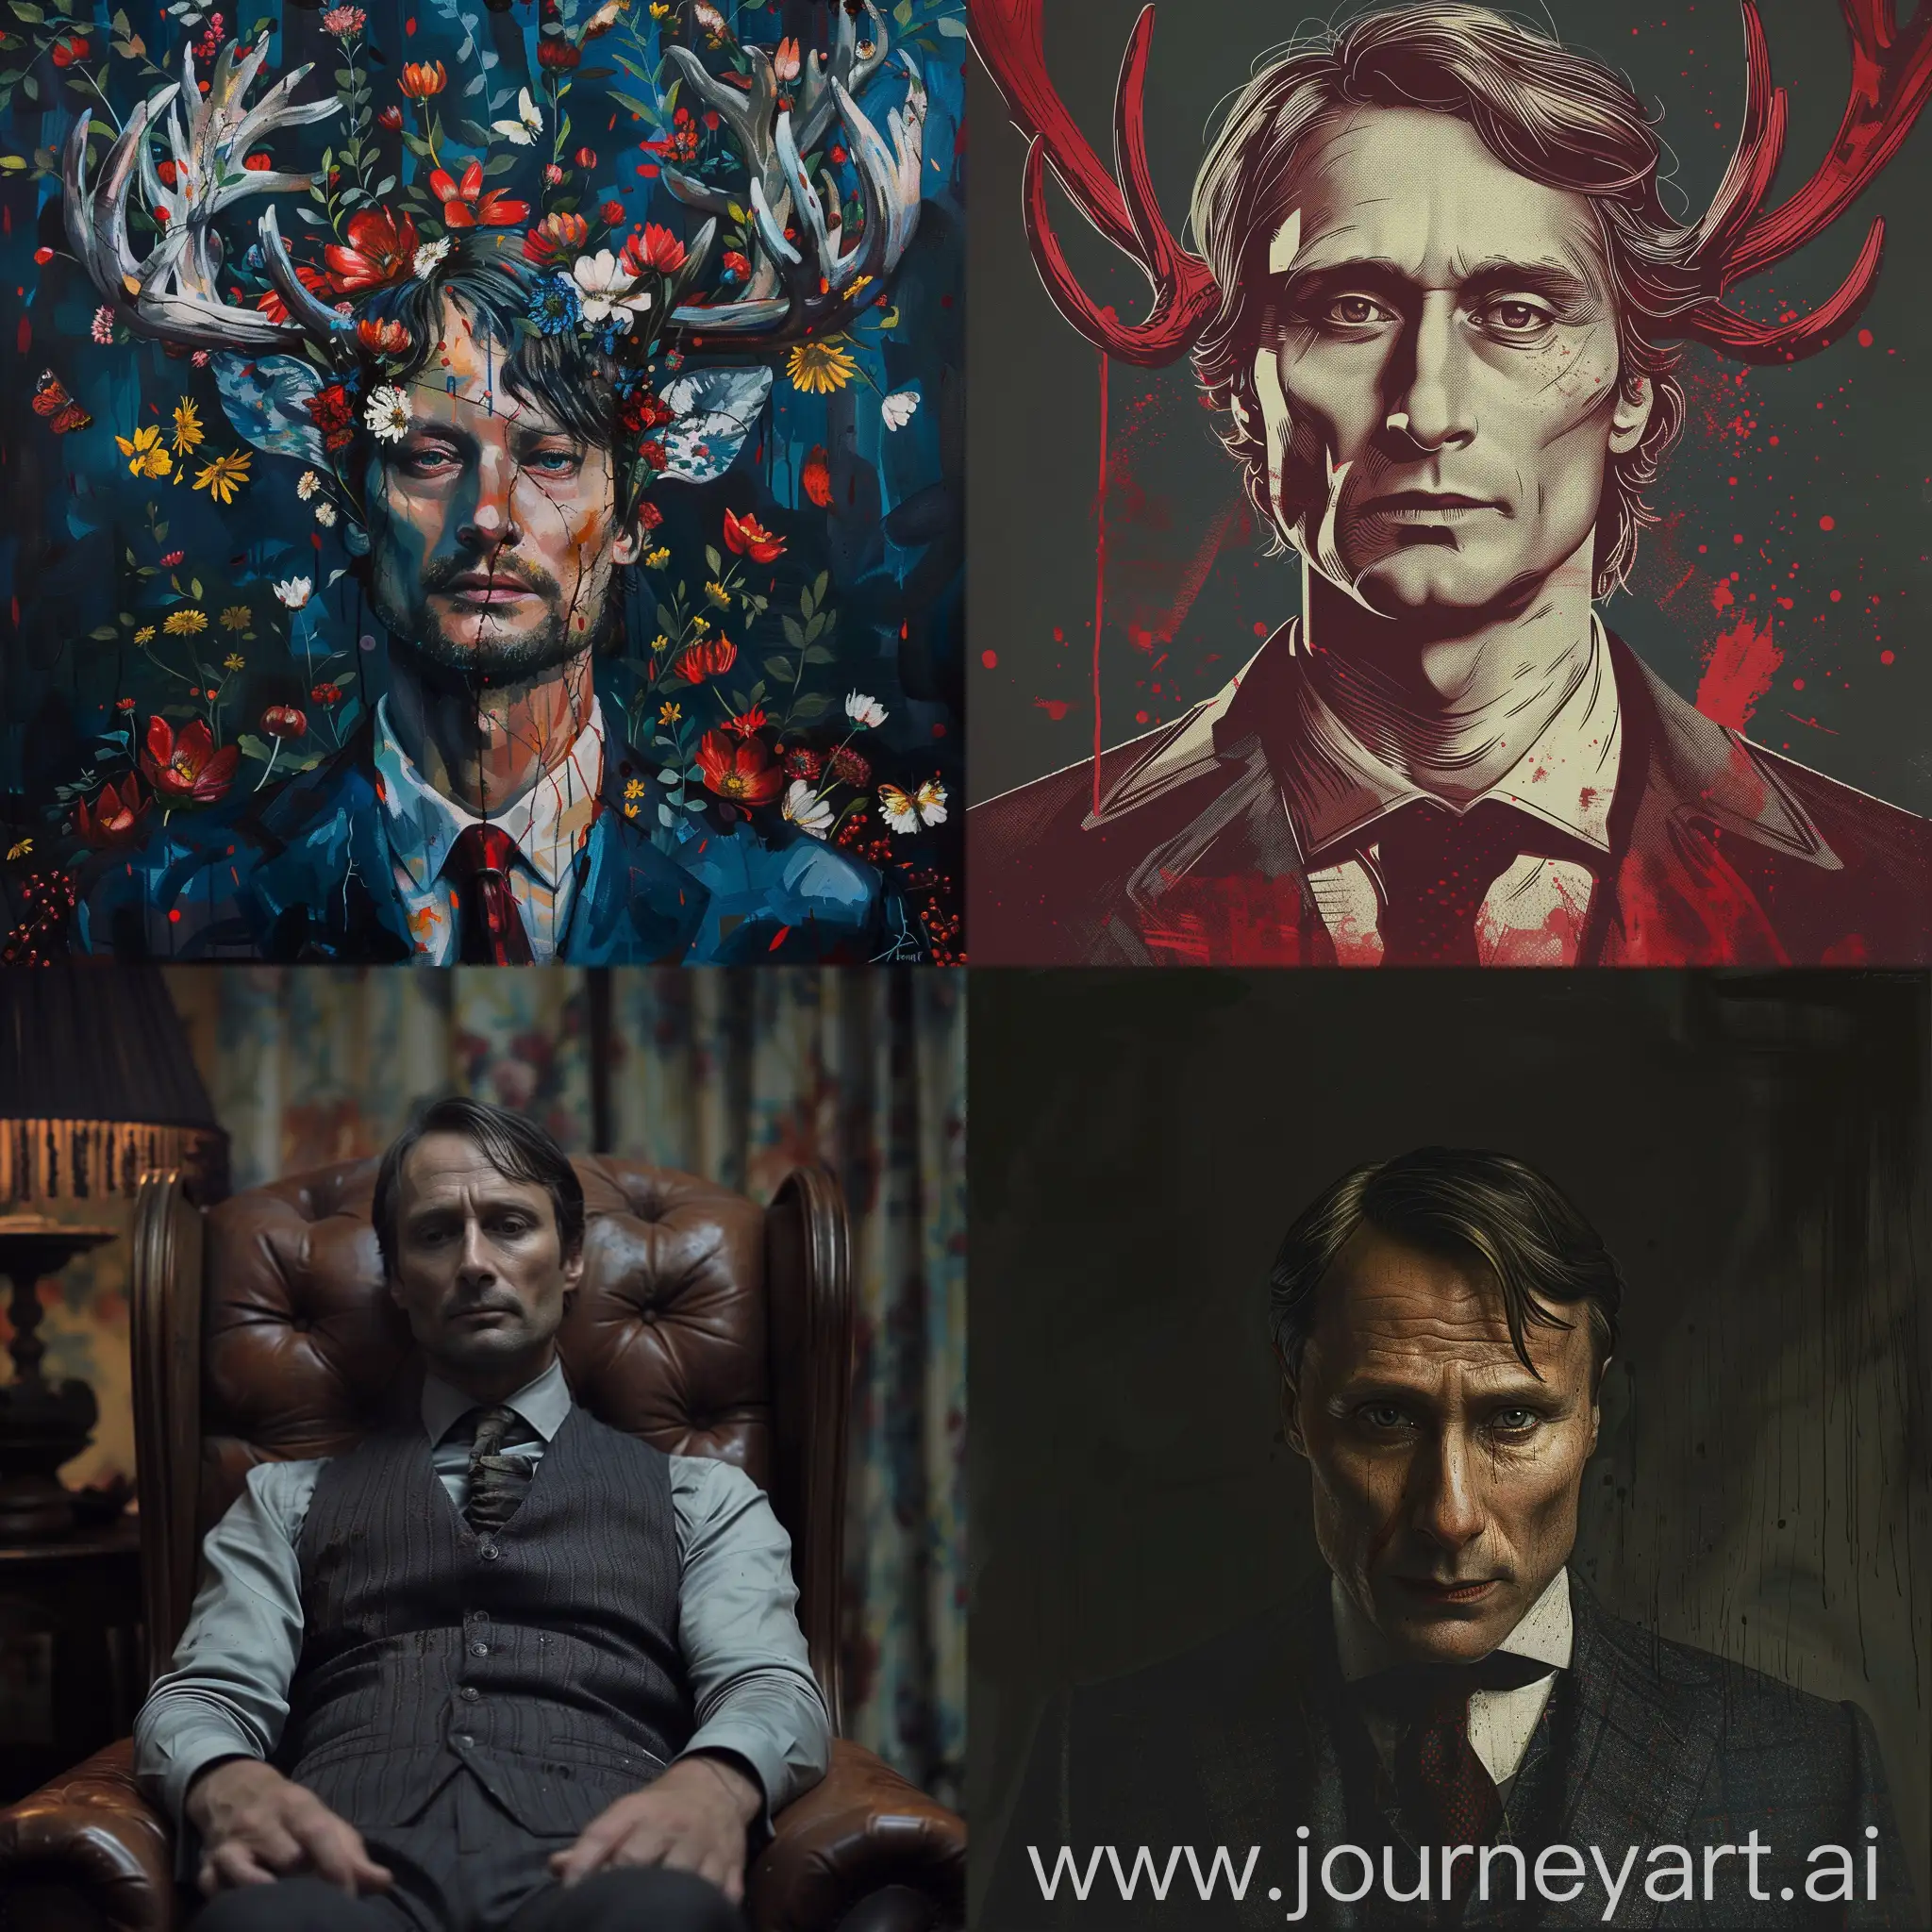 Hannibal-Eating-an-Apple-in-an-Abstract-Surrealistic-Style